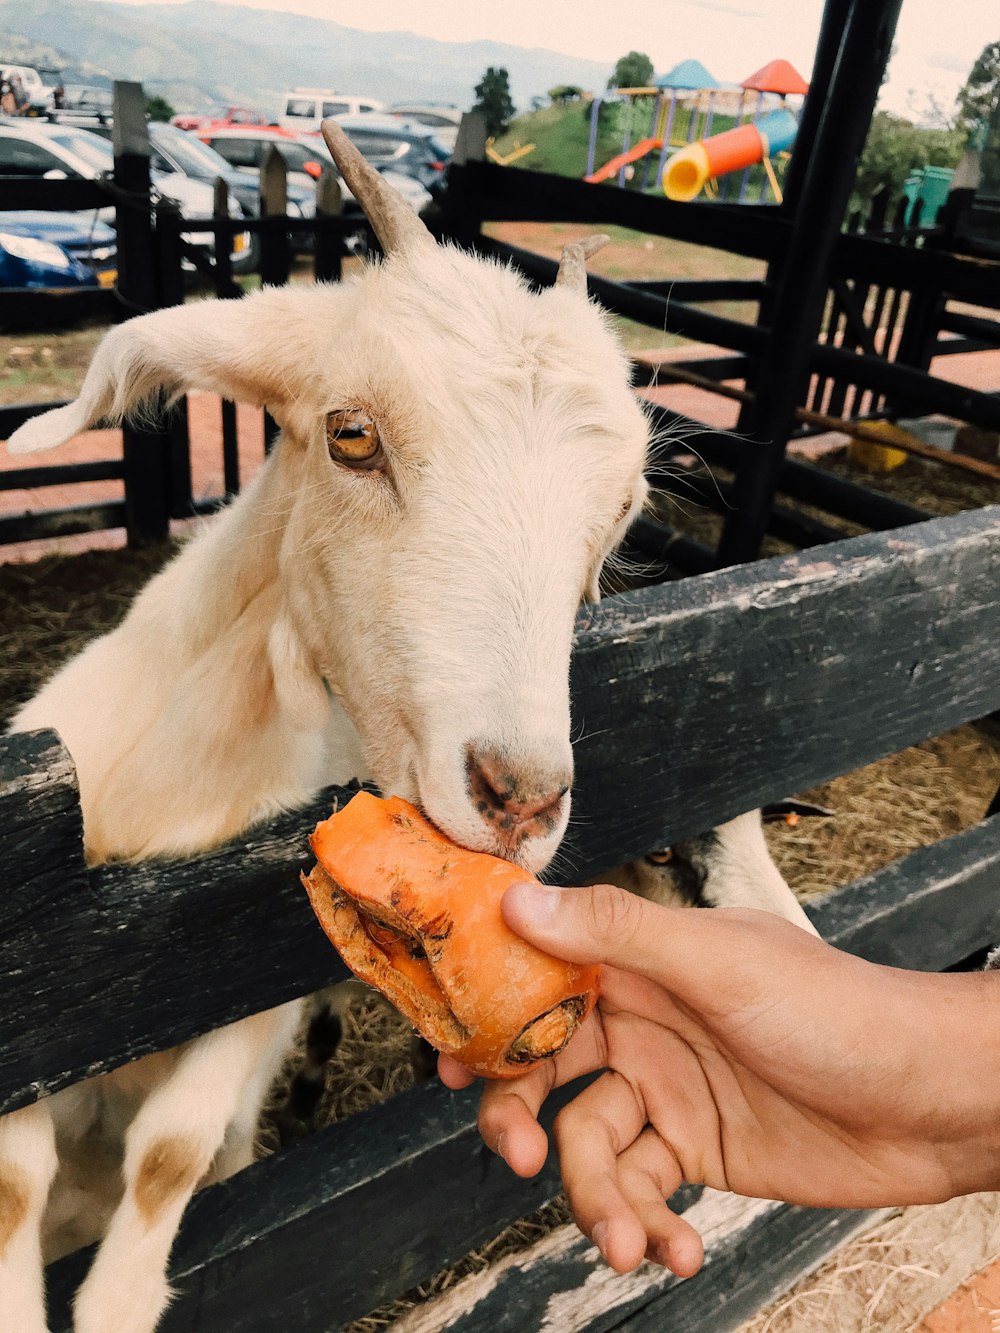 a person feeding a carrot to a goat